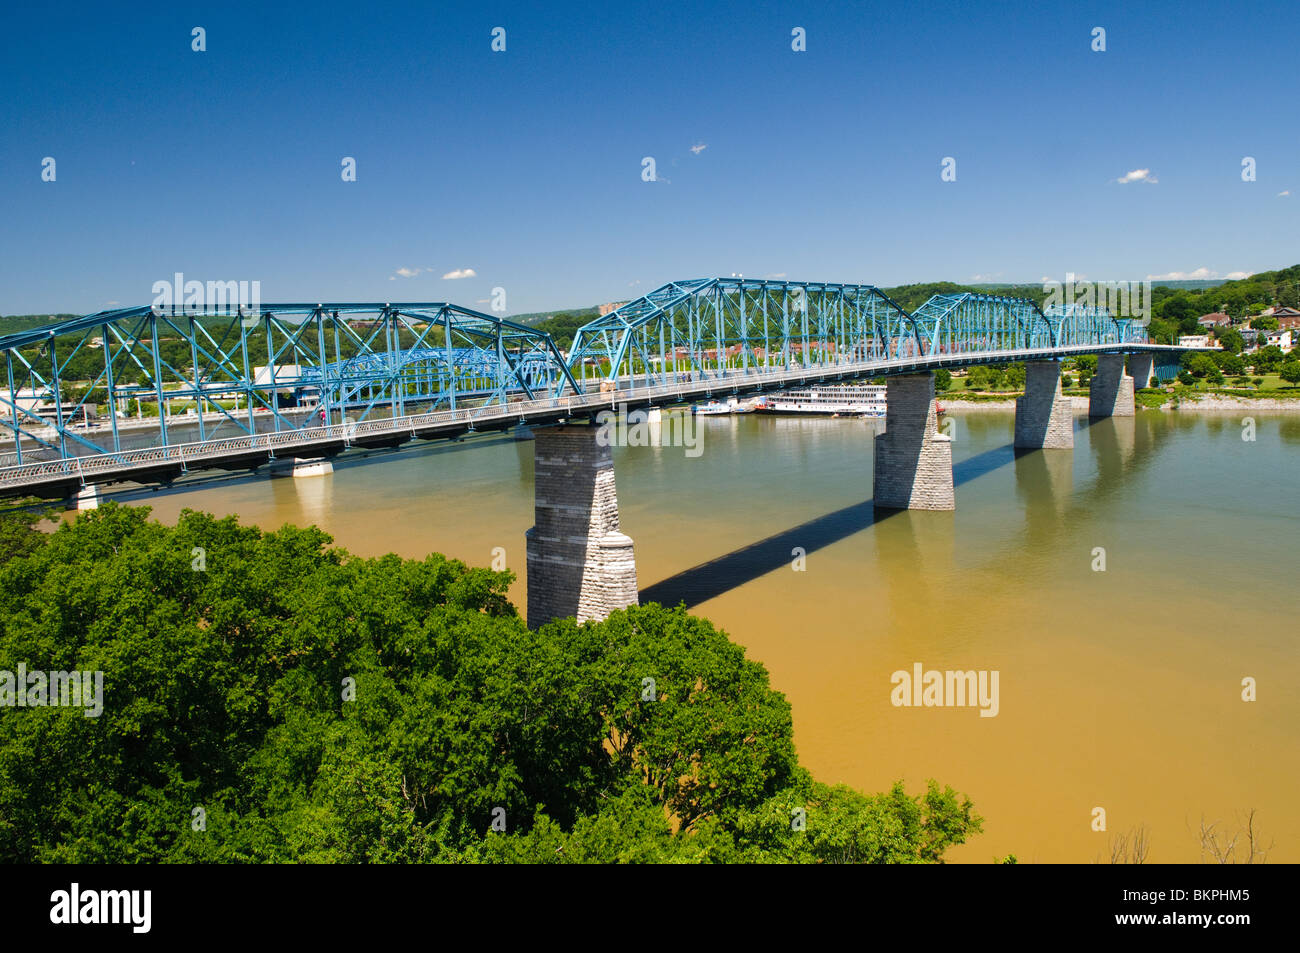 The Walnut Street Bridge, formerly a rail bridge but now converted to a pedestrian bridge, in Chattanooga, Tennessee Stock Photo